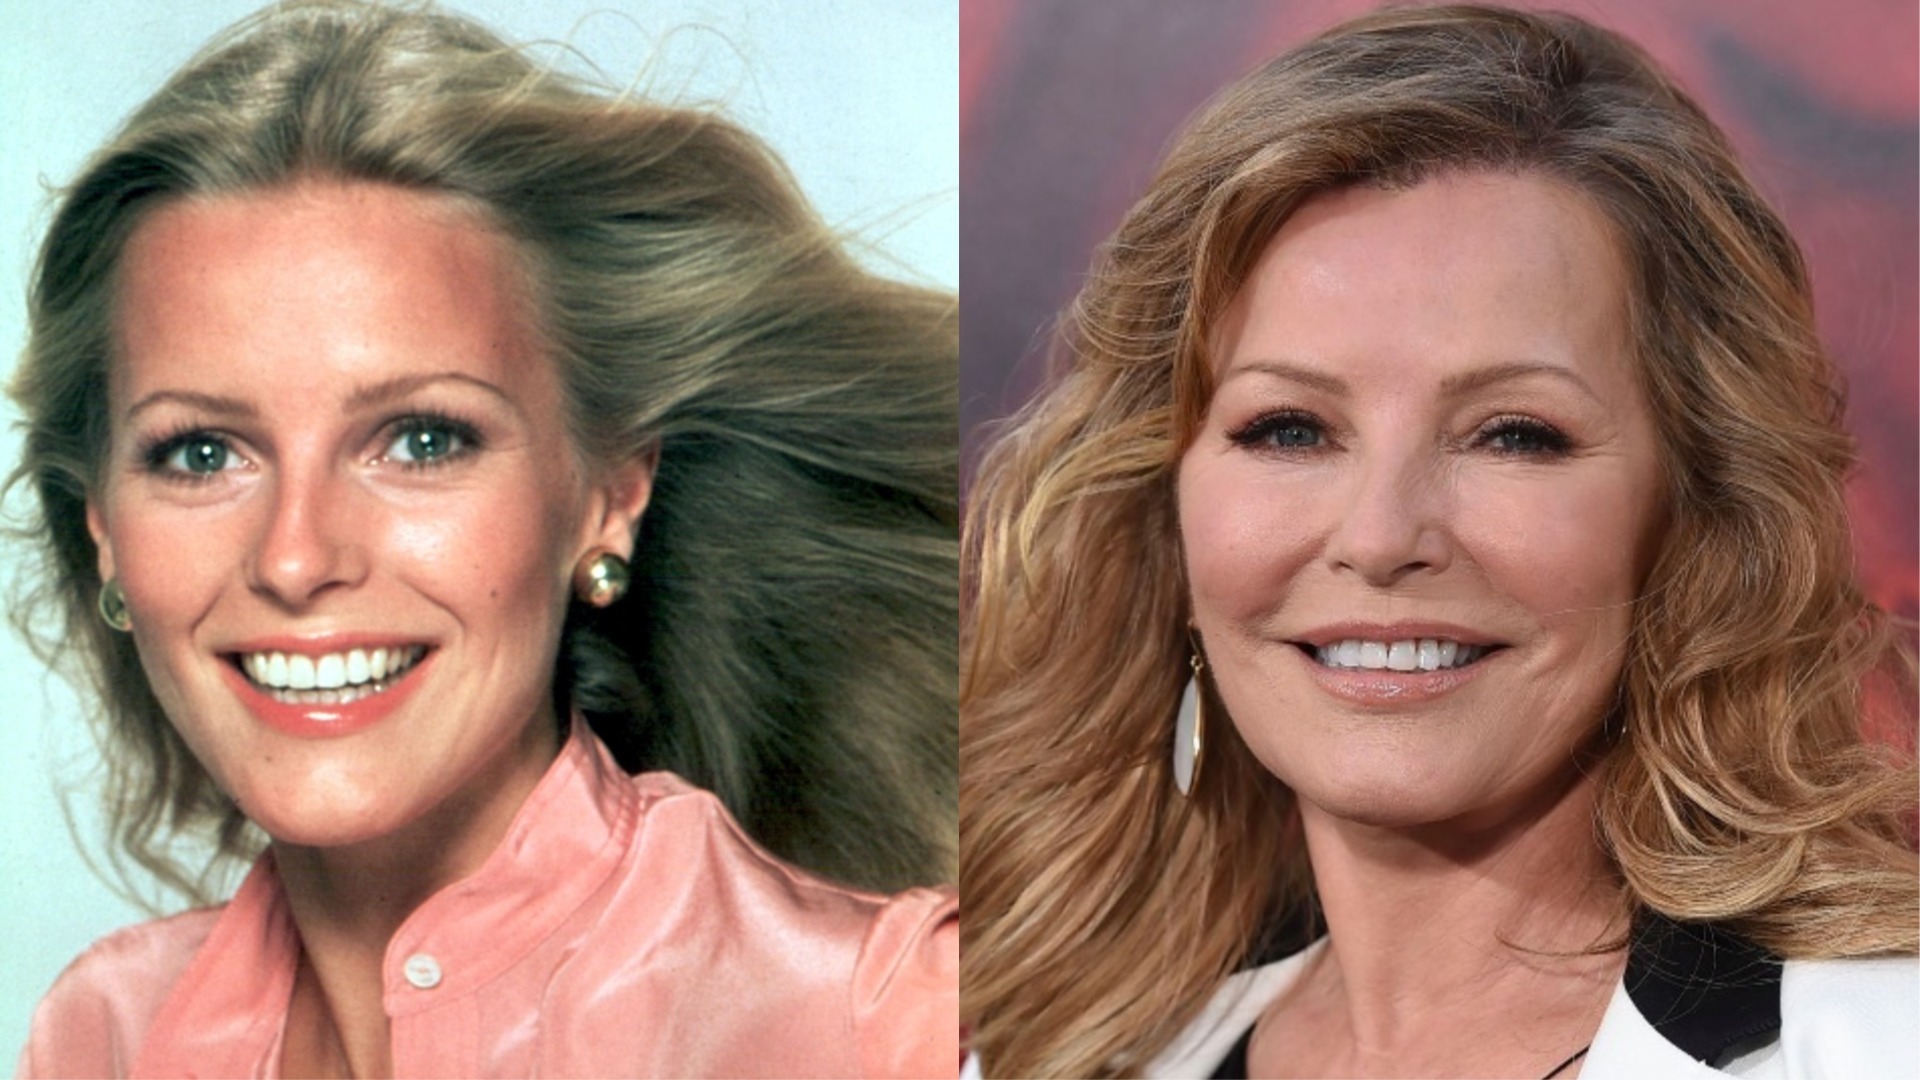 Happy birthday to Charlie s Angels alum Cheryl Ladd who is 69 today! 